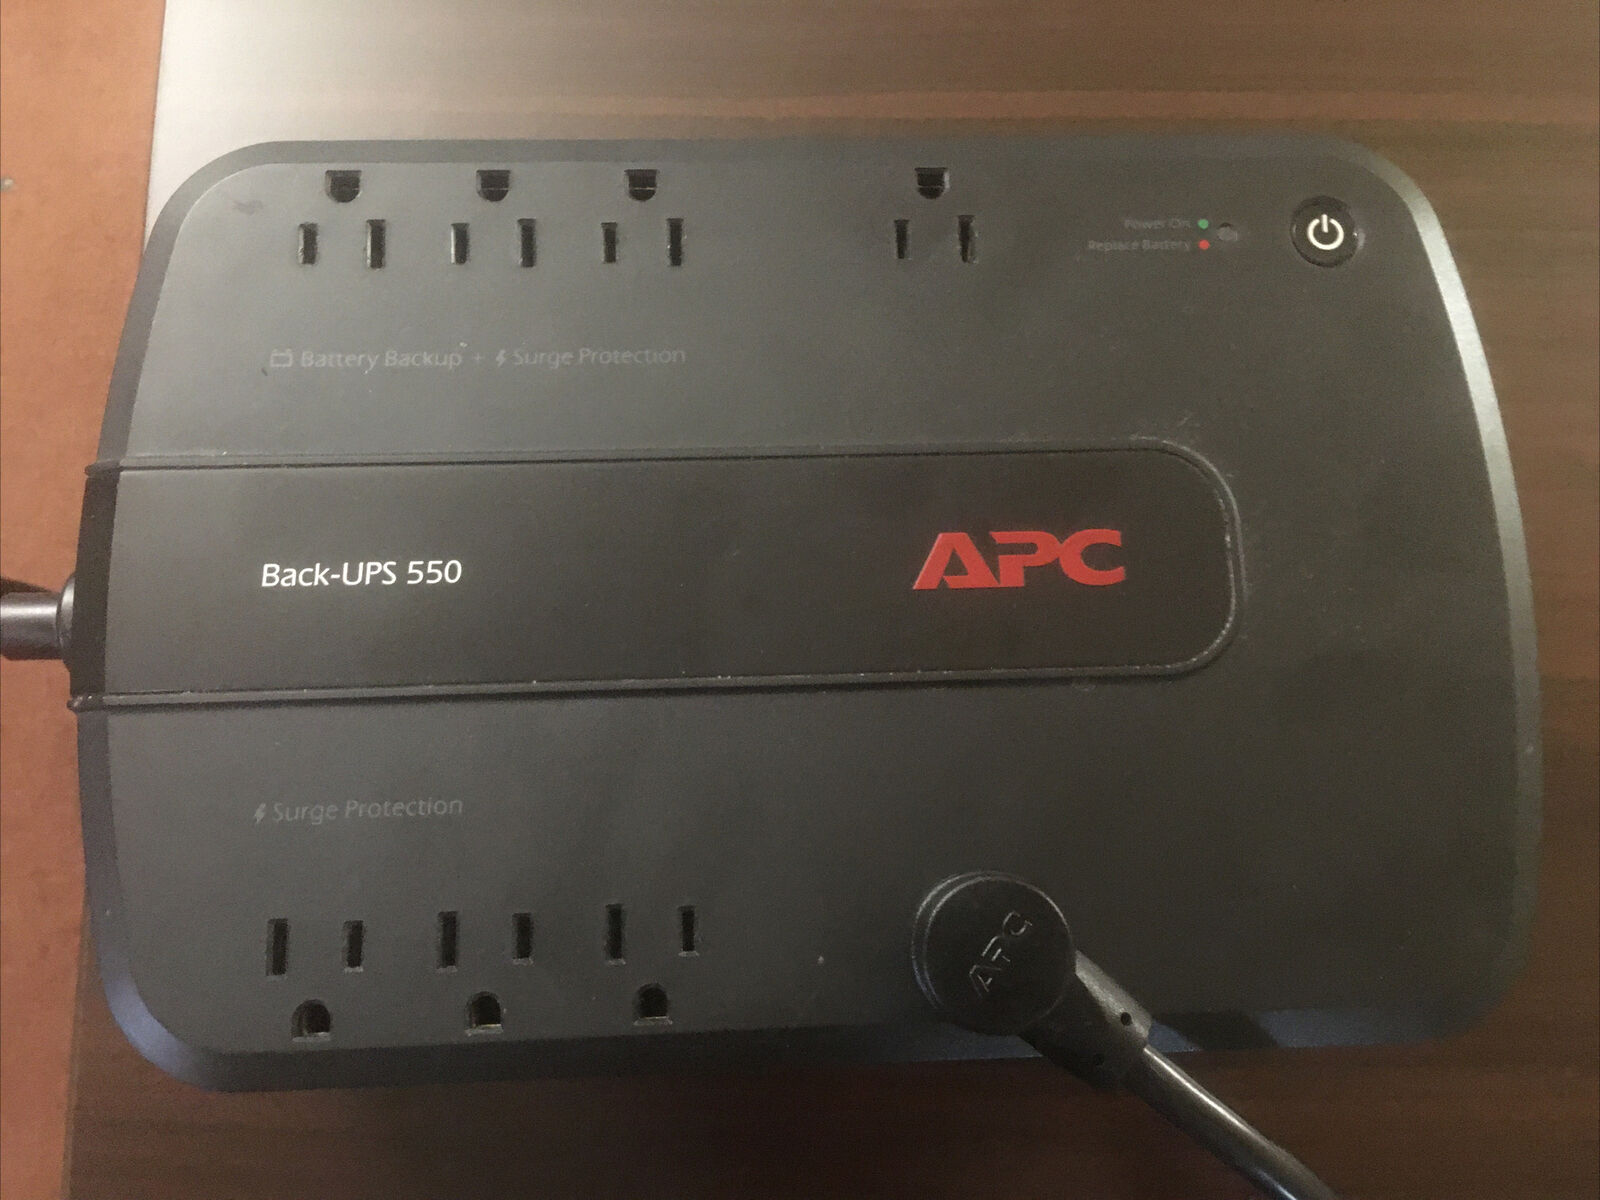 APC Back-UPS ES 550 BE550G 8-Outlet Battery Back Up Surge Protector, No Battery